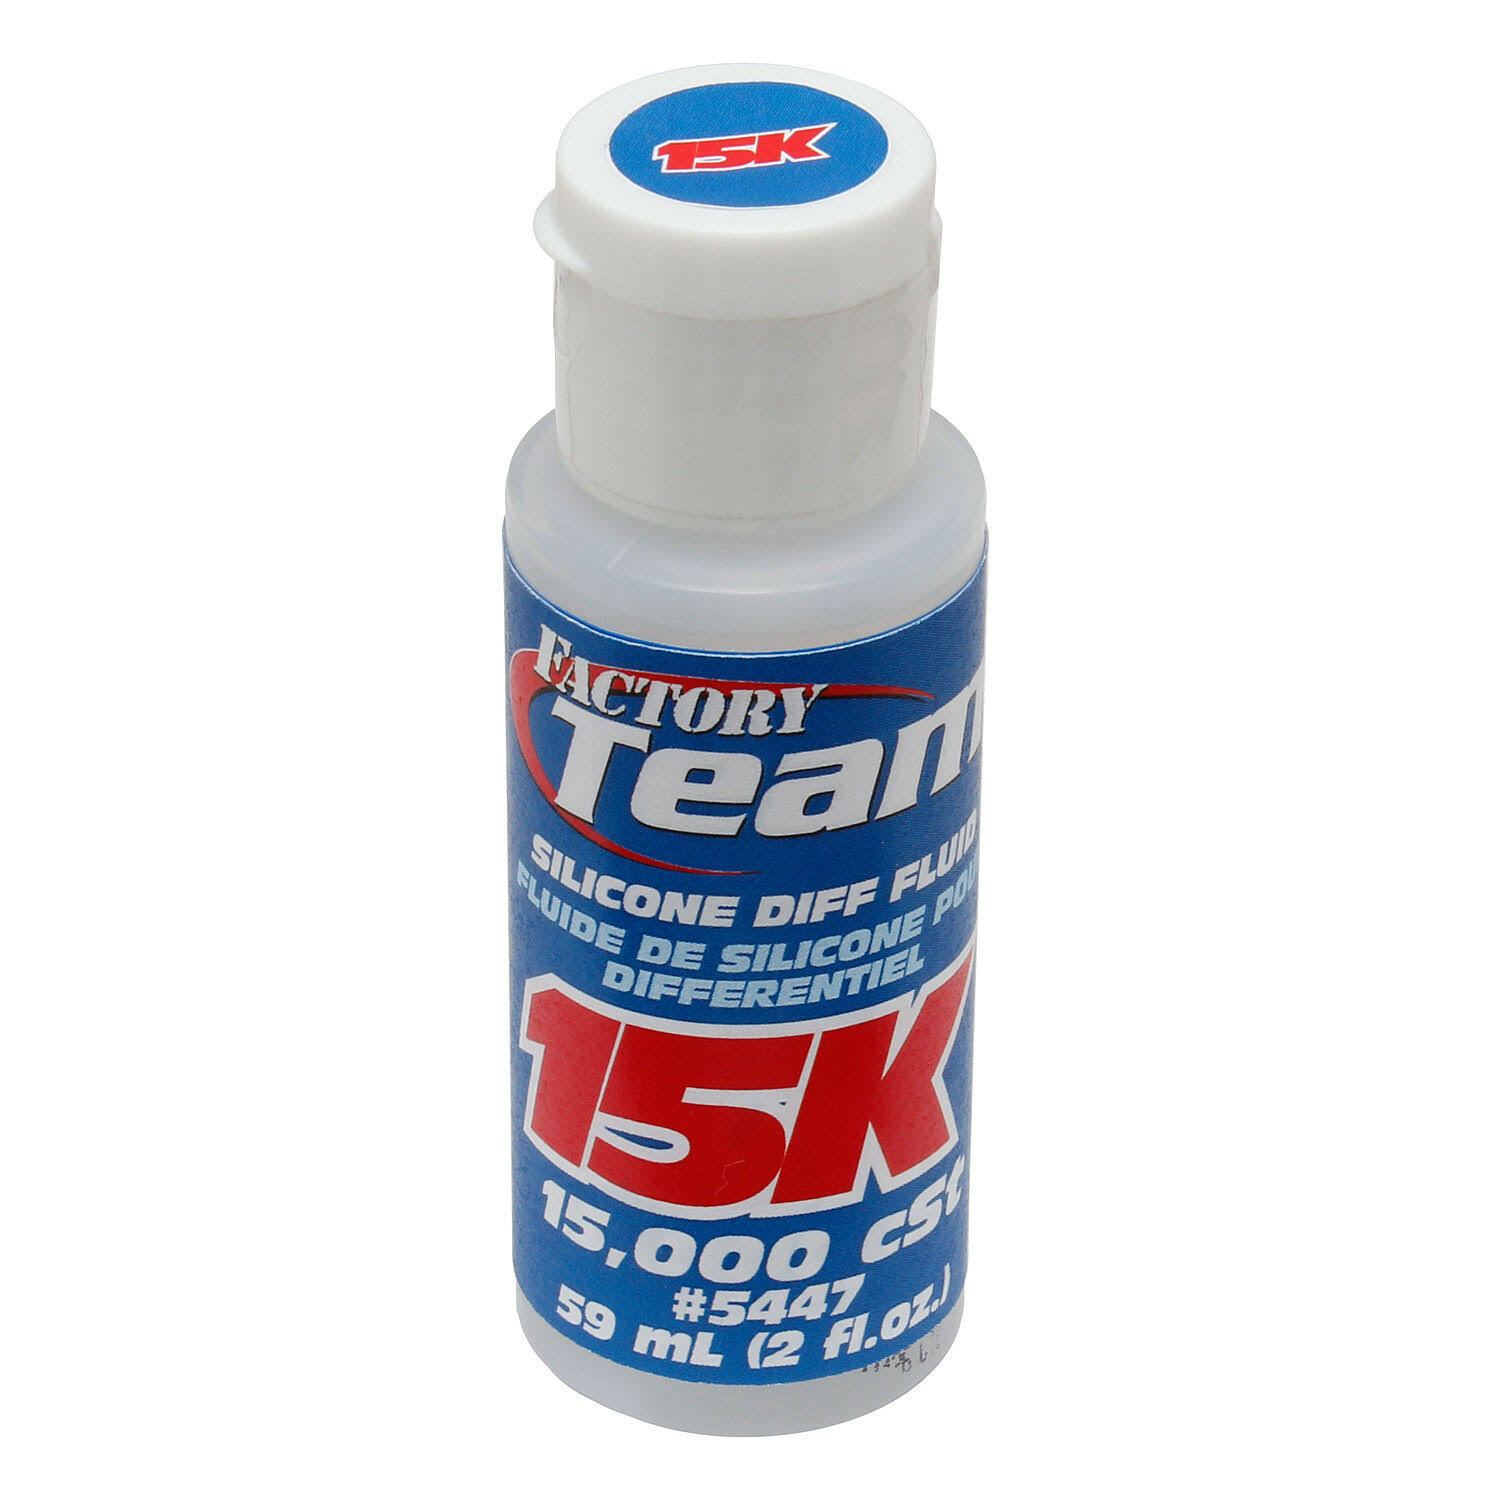 Associated 5447 Factory Team Silicone Differential Fluid - 15000cst, 2oz